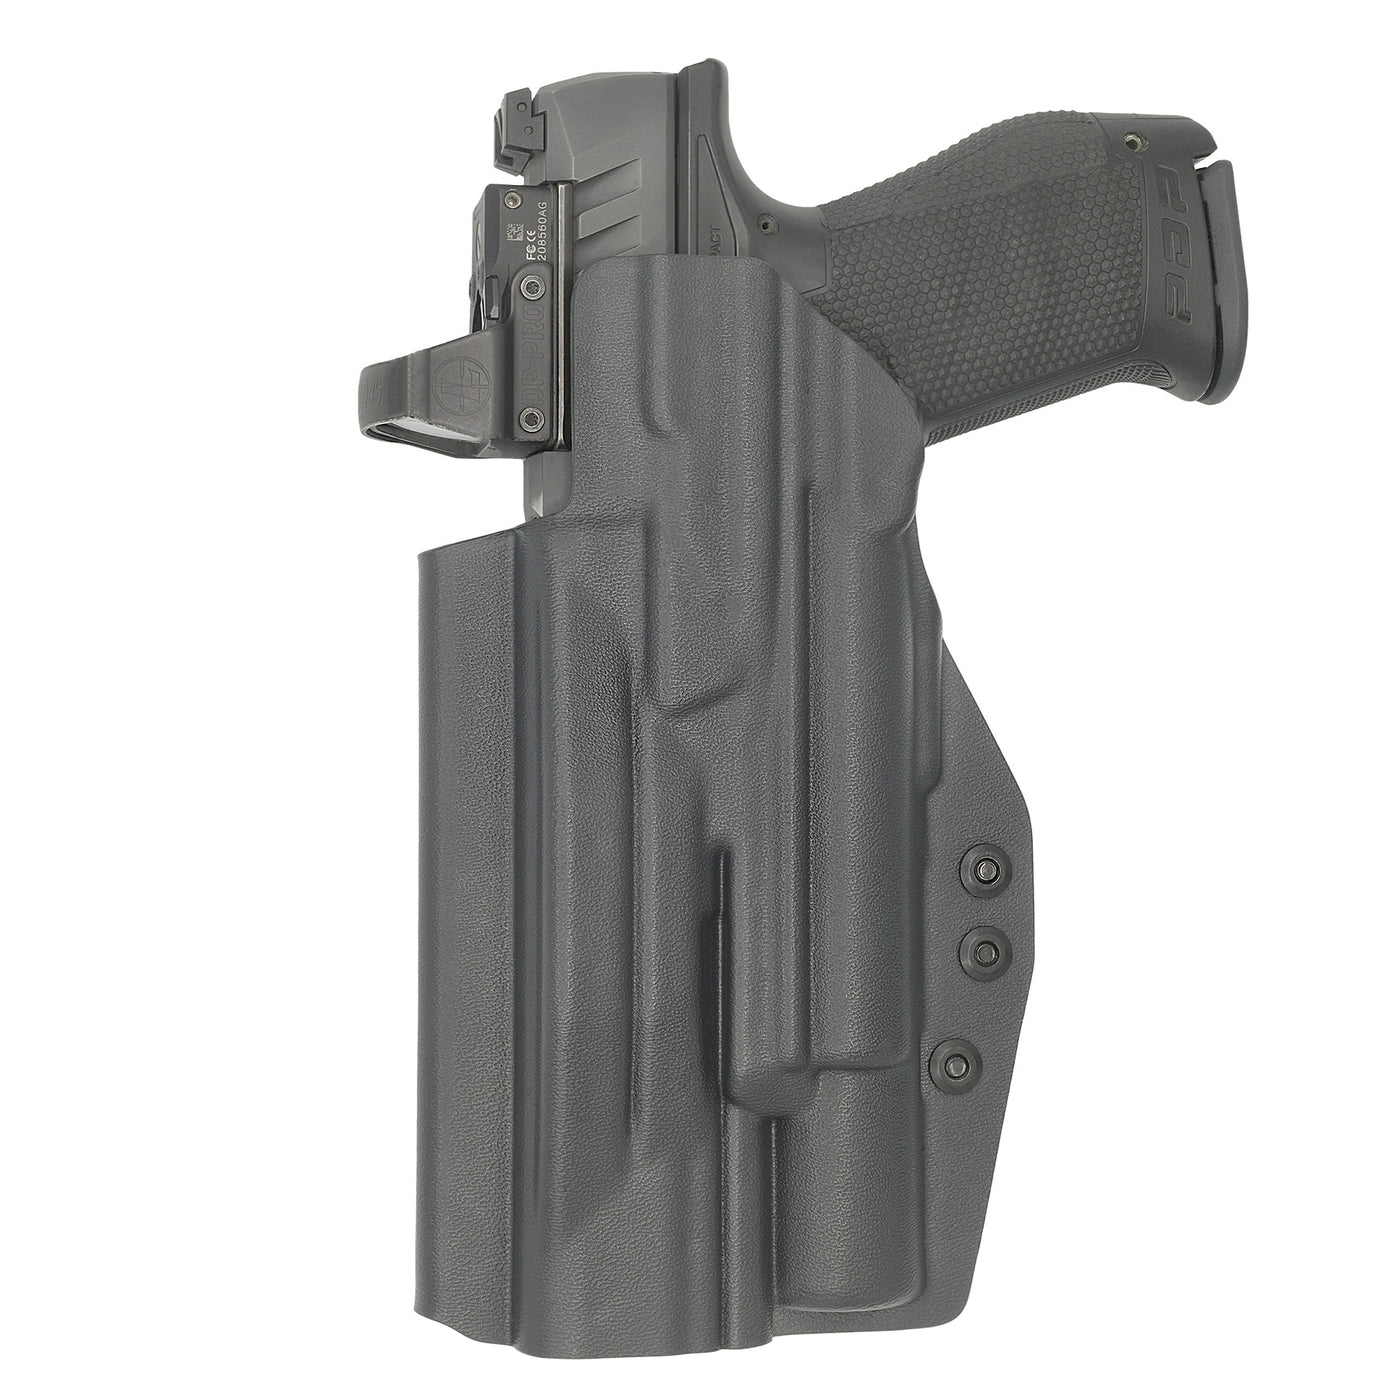 C&G Holsters Quickship IWB Tactical Walther PDP Surefire X300 in holstered position back view